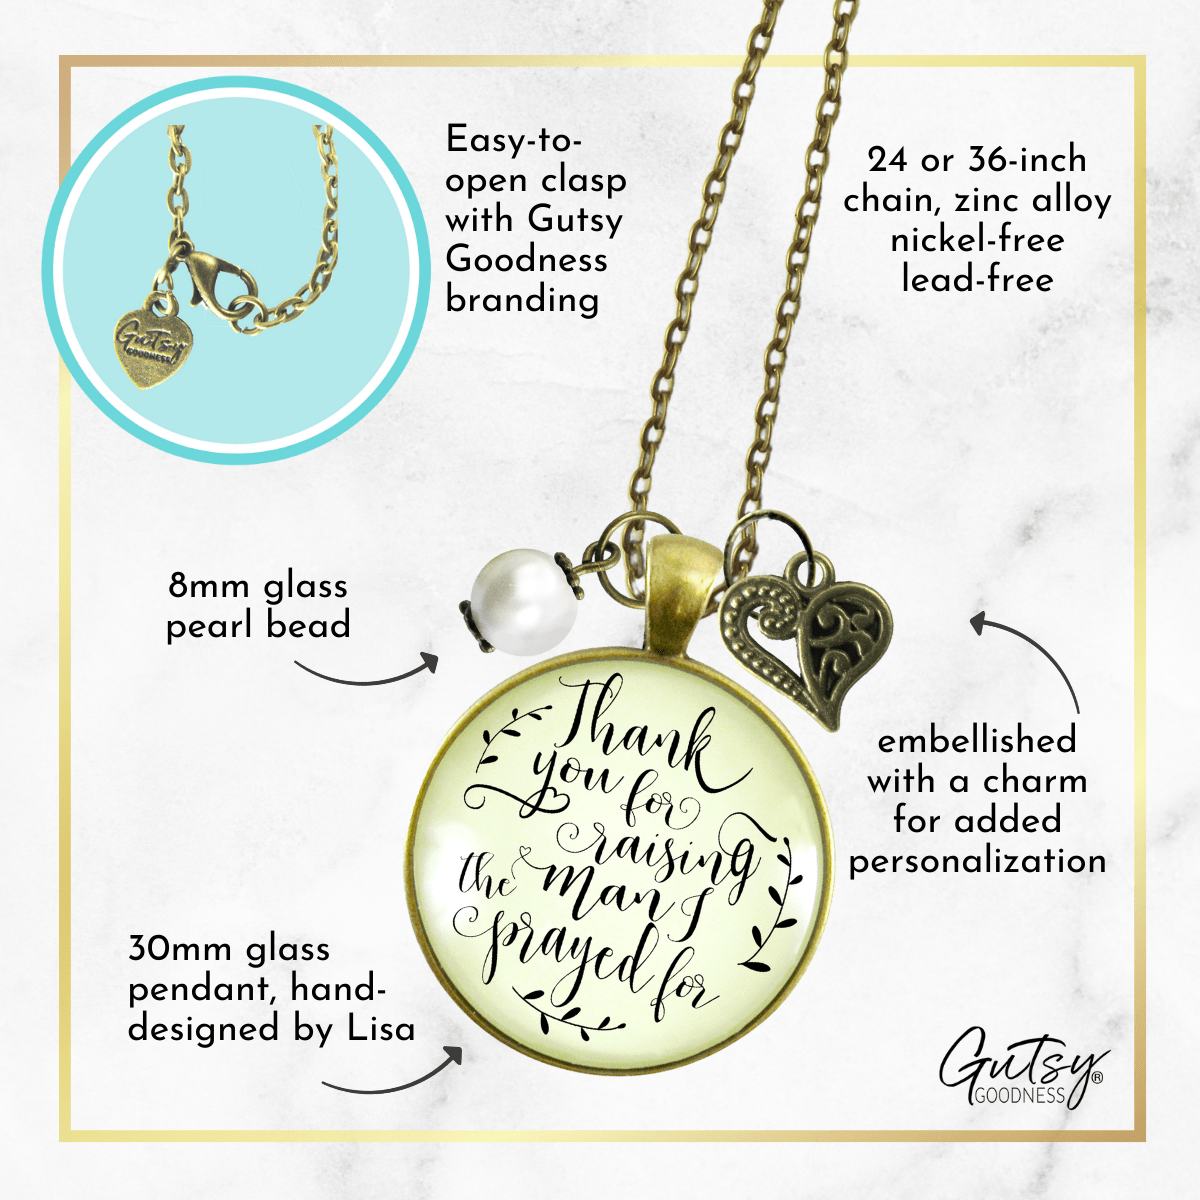 Gutsy Goodness To Her Mother in Law Necklace Thank You Man I Prayed For Christian Wedding Gift - Gutsy Goodness Handmade Jewelry;To Her Mother In Law Necklace Thank You Man I Prayed For Christian Wedding Gift - Gutsy Goodness Handmade Jewelry Gifts